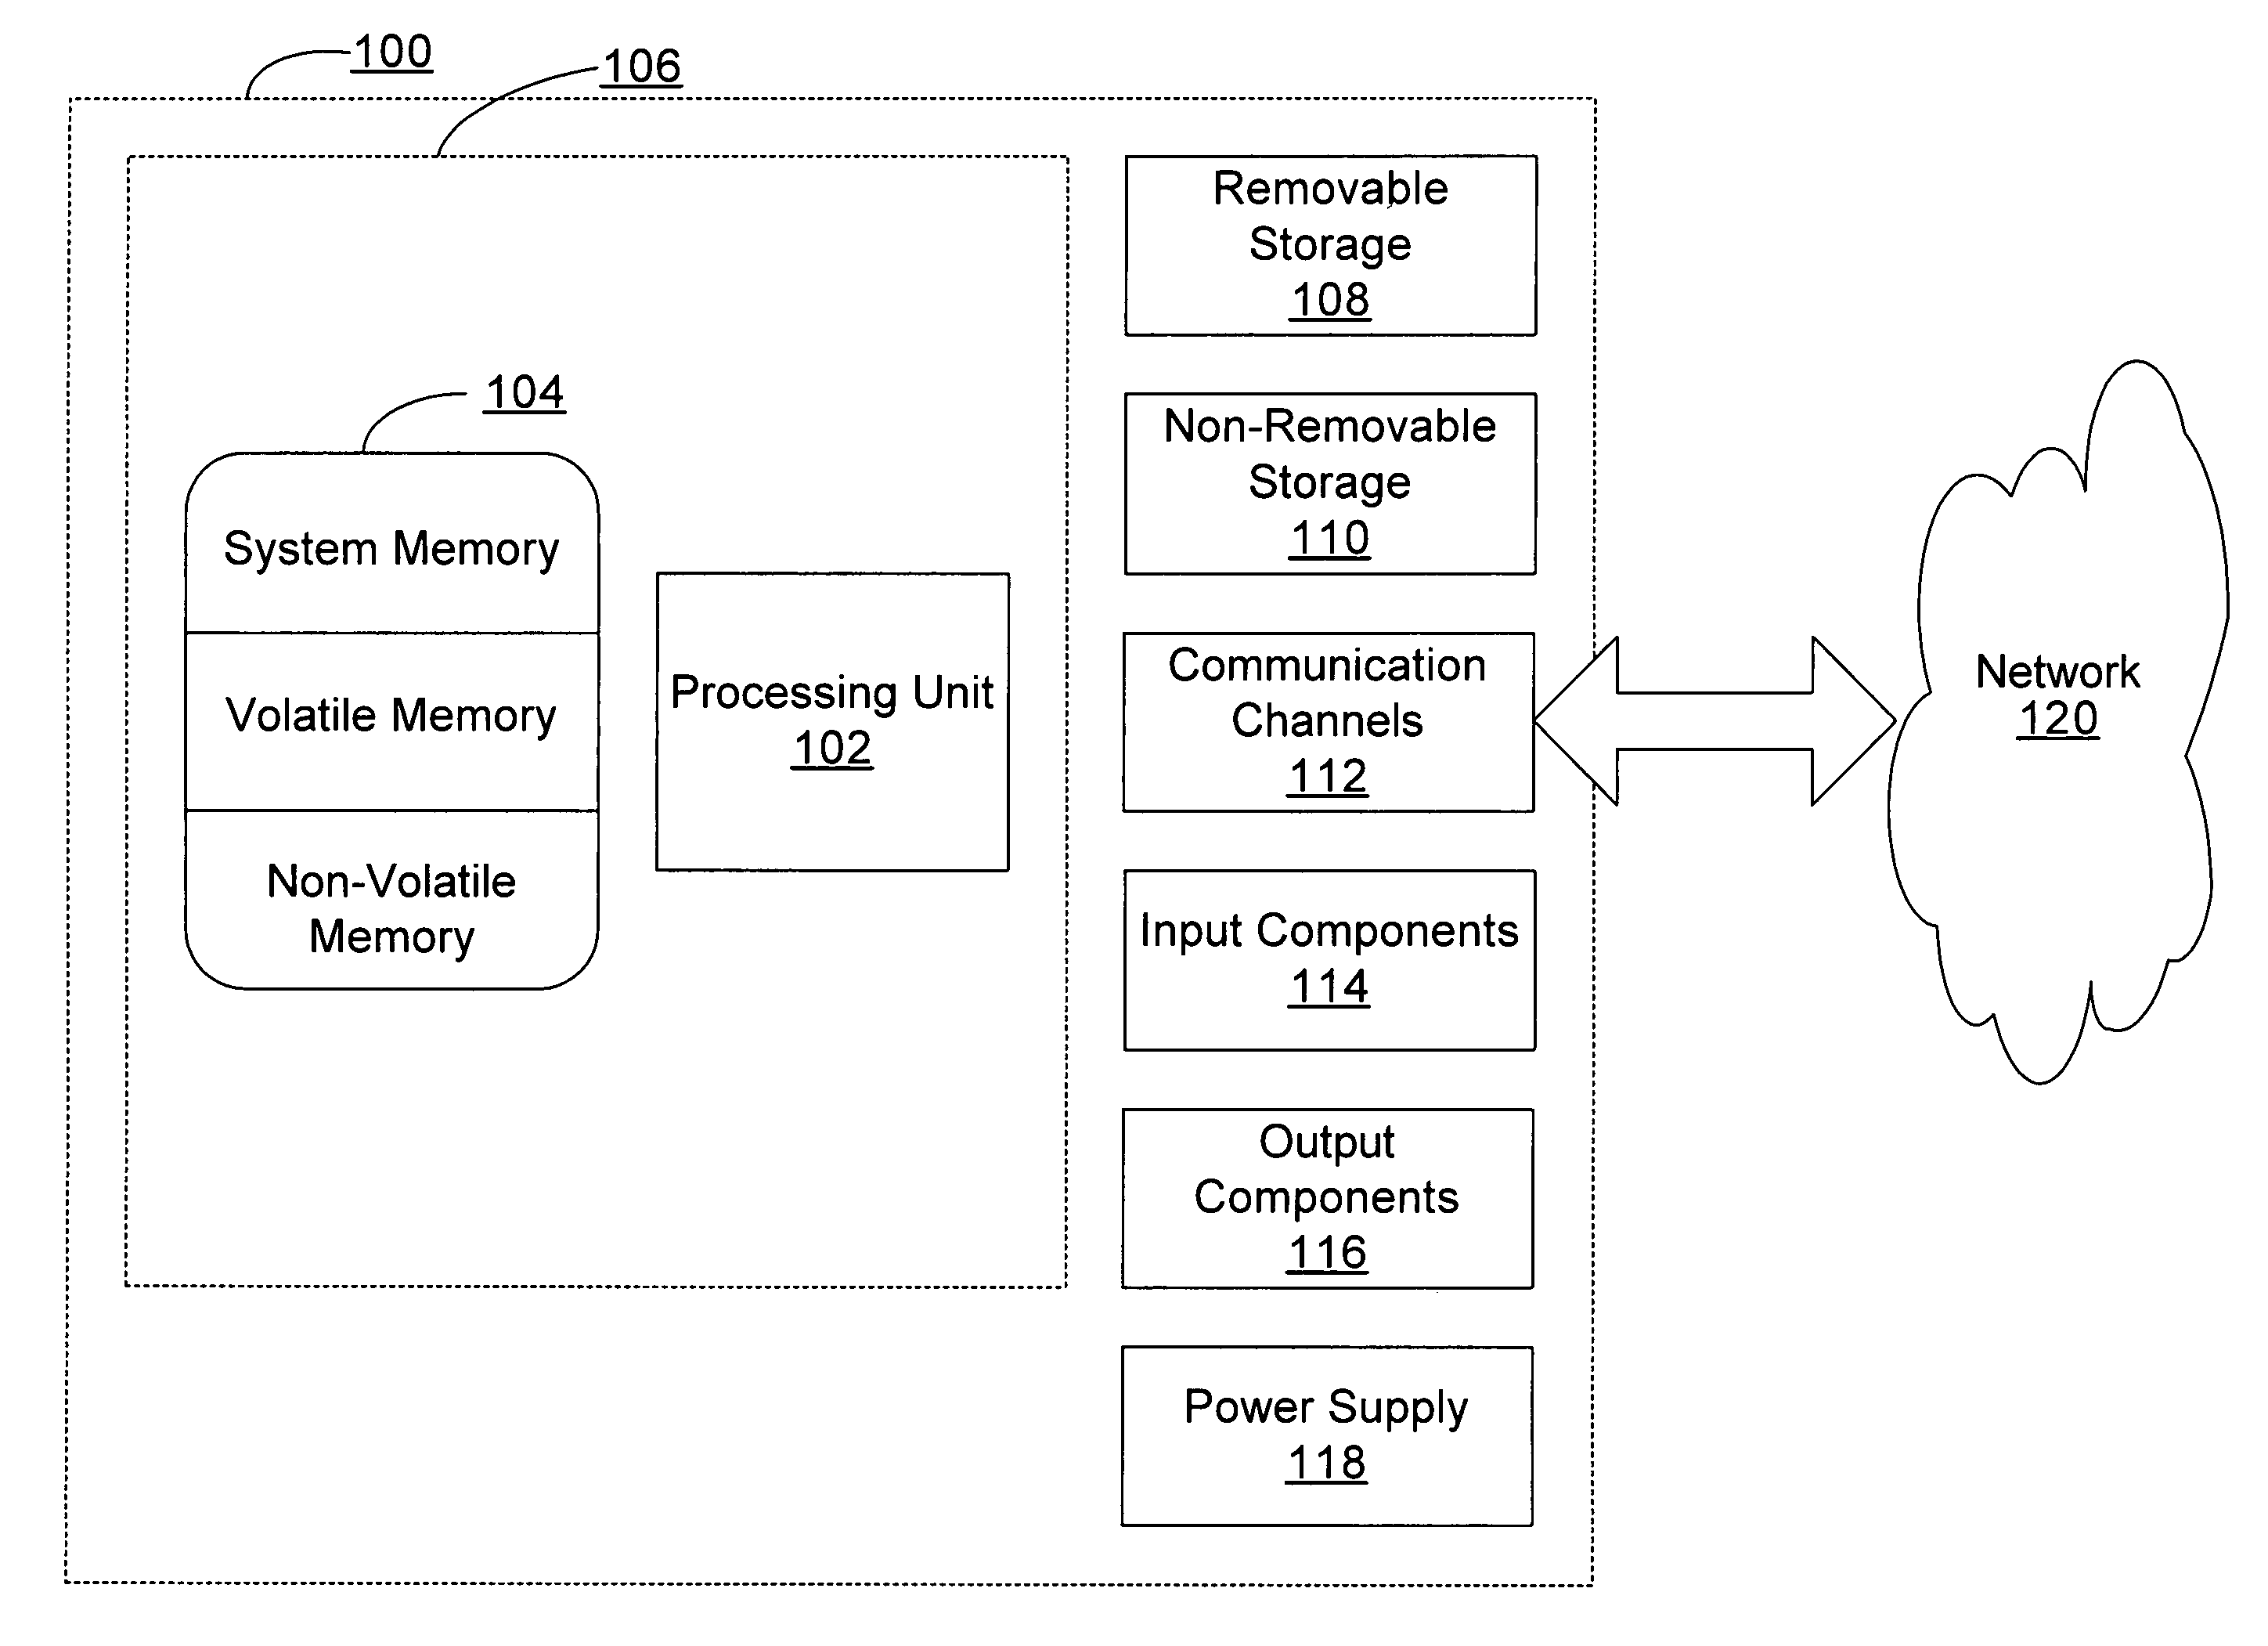 Method for dynamic application of rights management policy